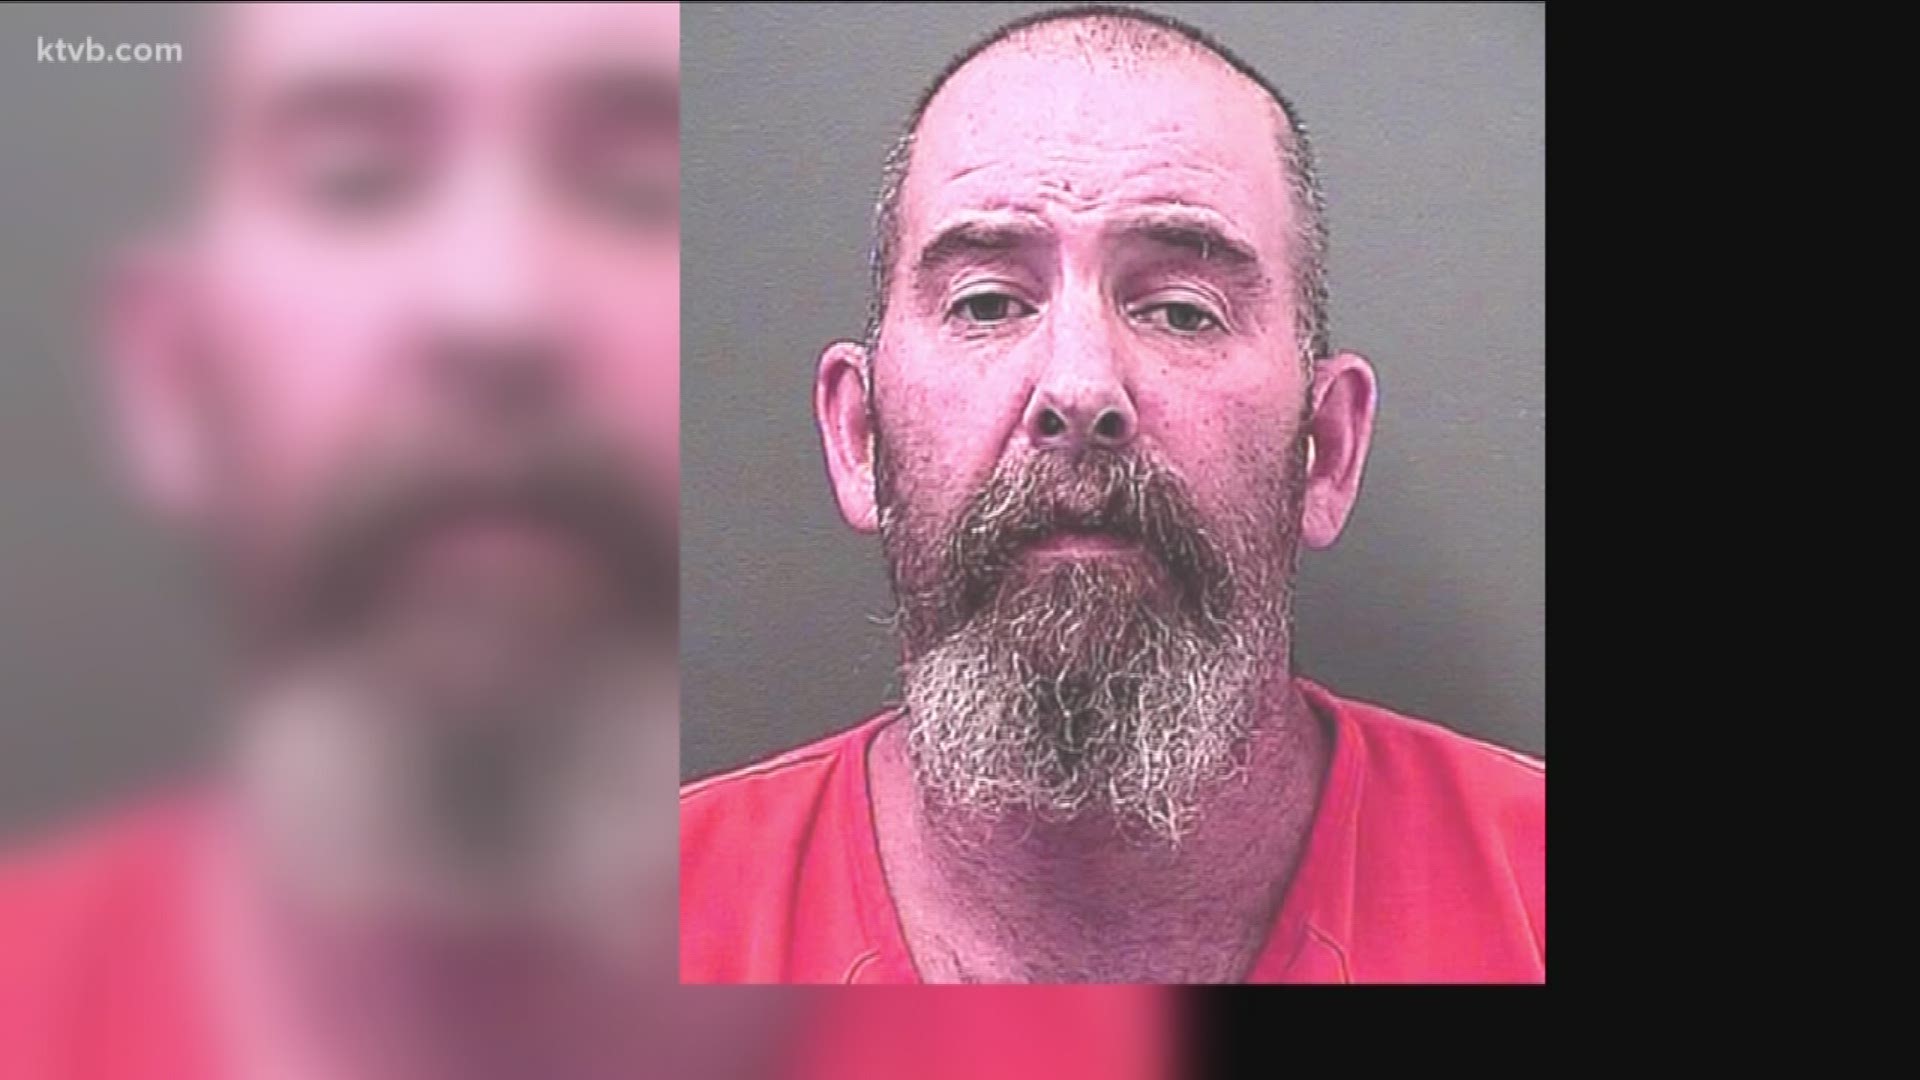 A man investigators say is connected to a deadly shooting at a Marsing home has been charged with manslaughter.